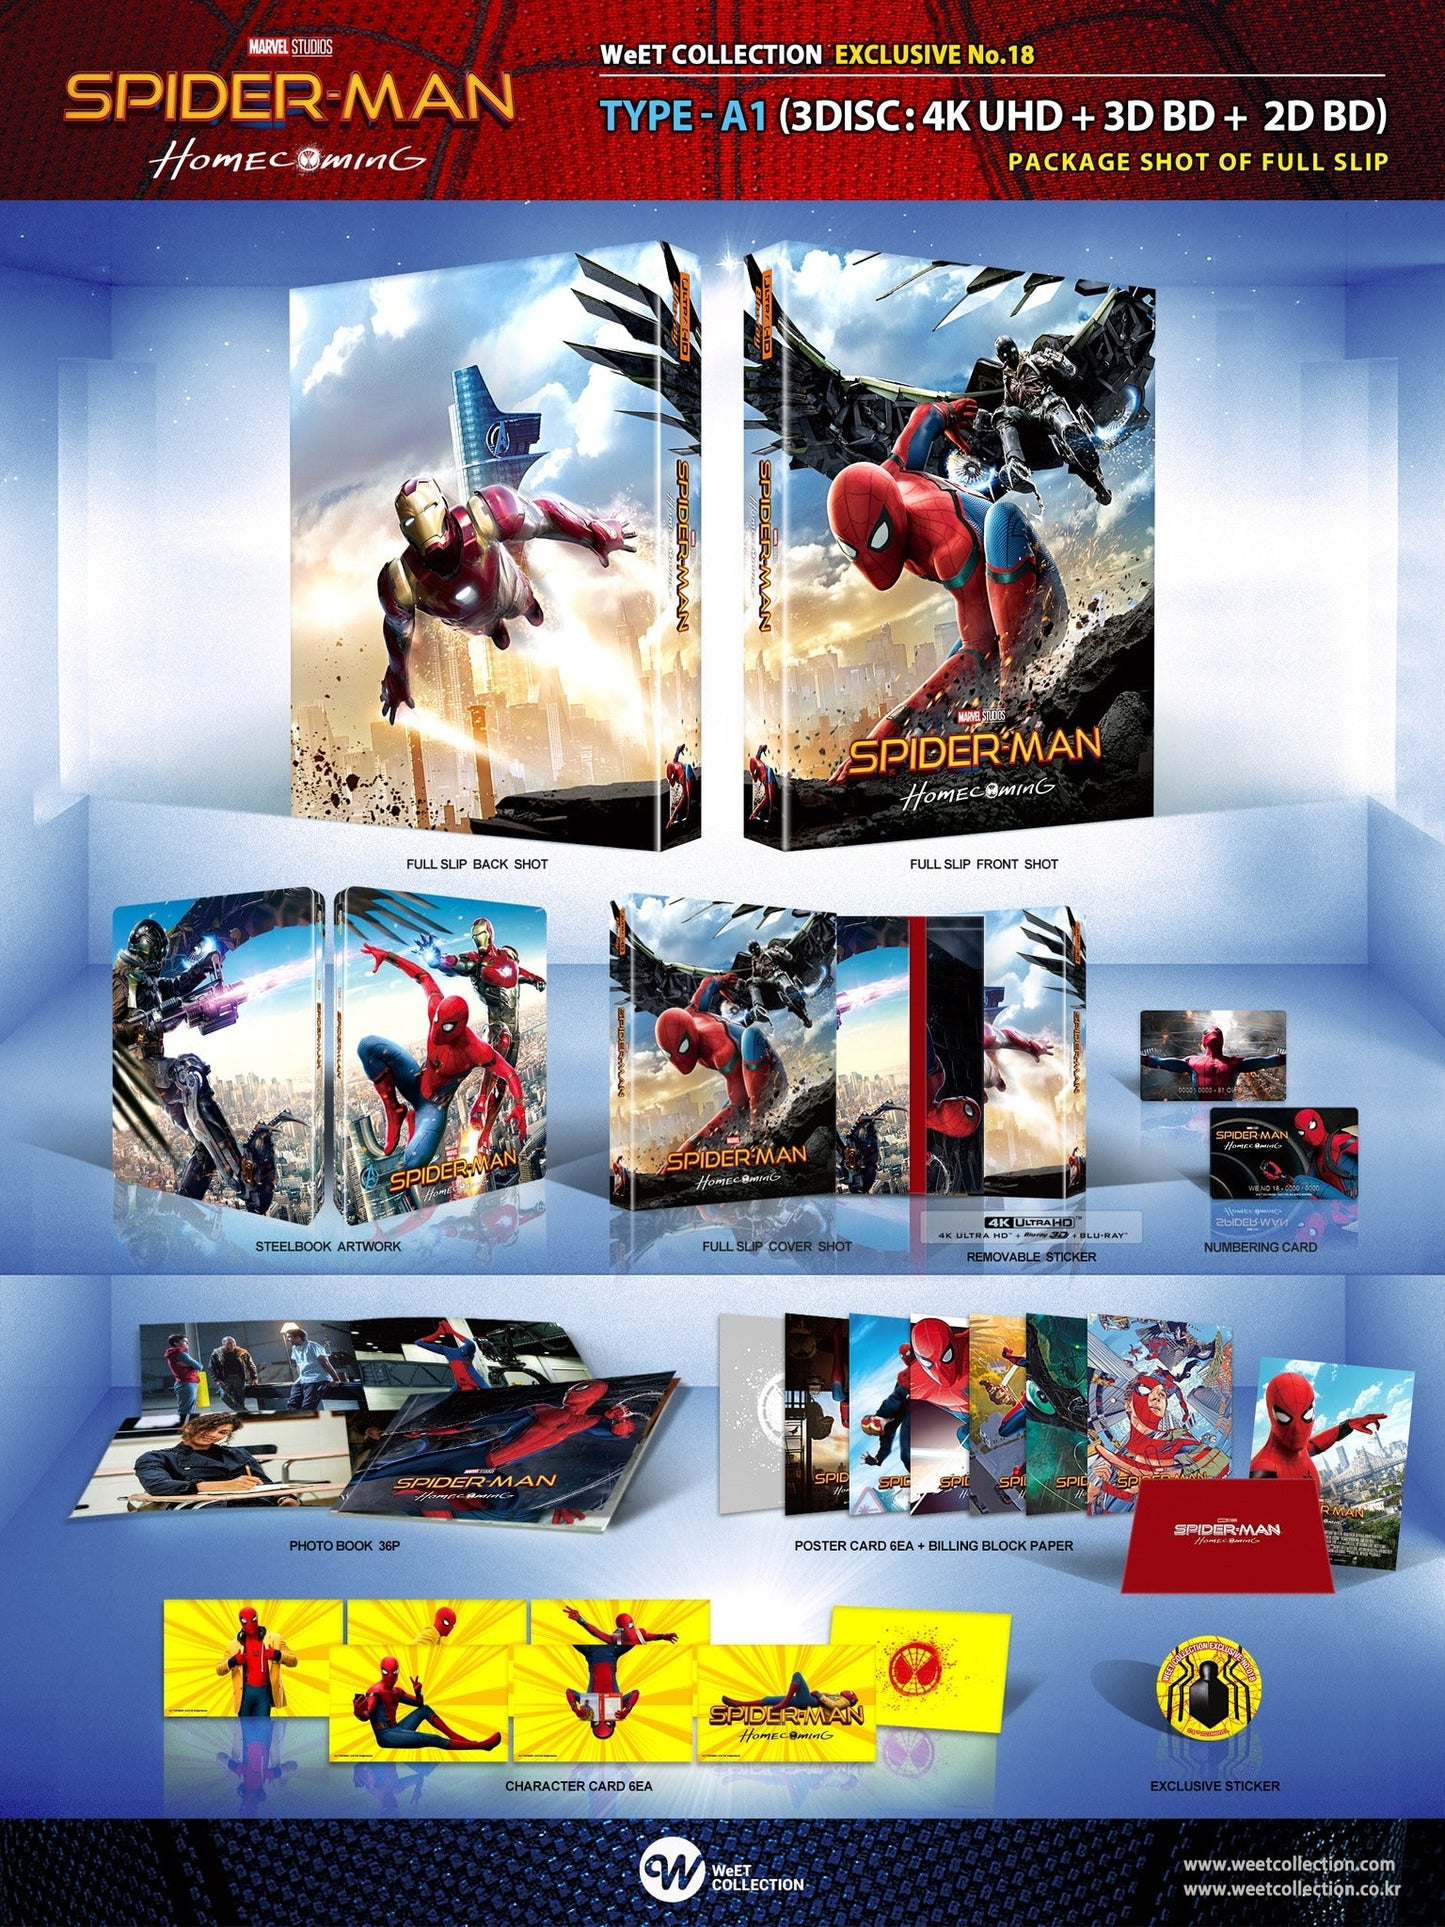 Spider-Man Homecoming 4K 3D Blu-ray Steelbook WeET Collection Exclusive #18 One Click Box Set